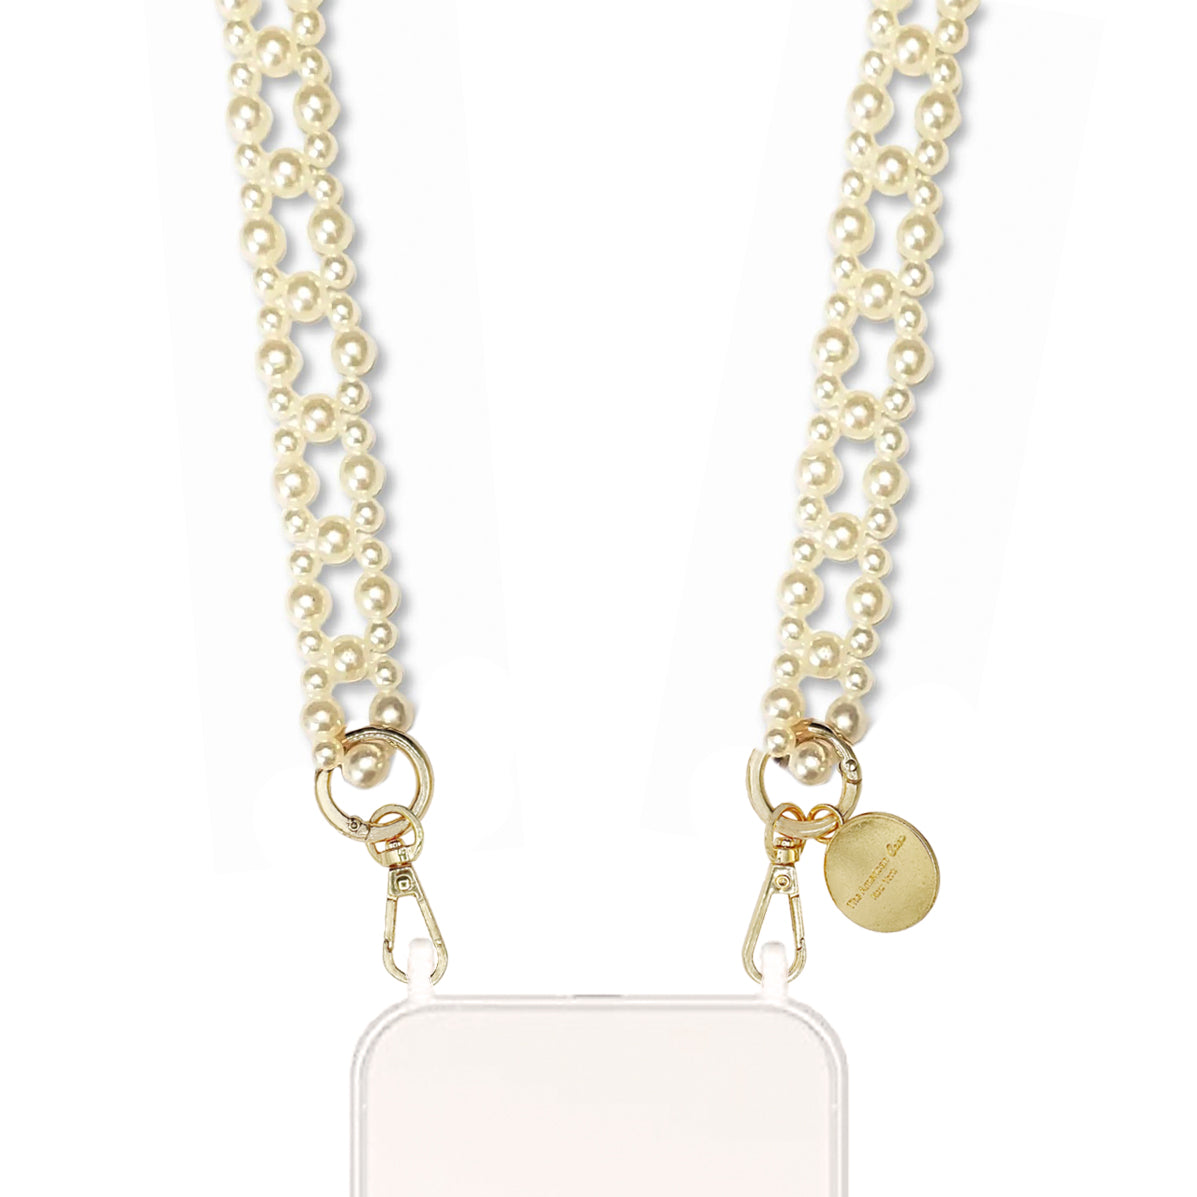 Aziza - Braided Pearl Chain with Golden Carabiners